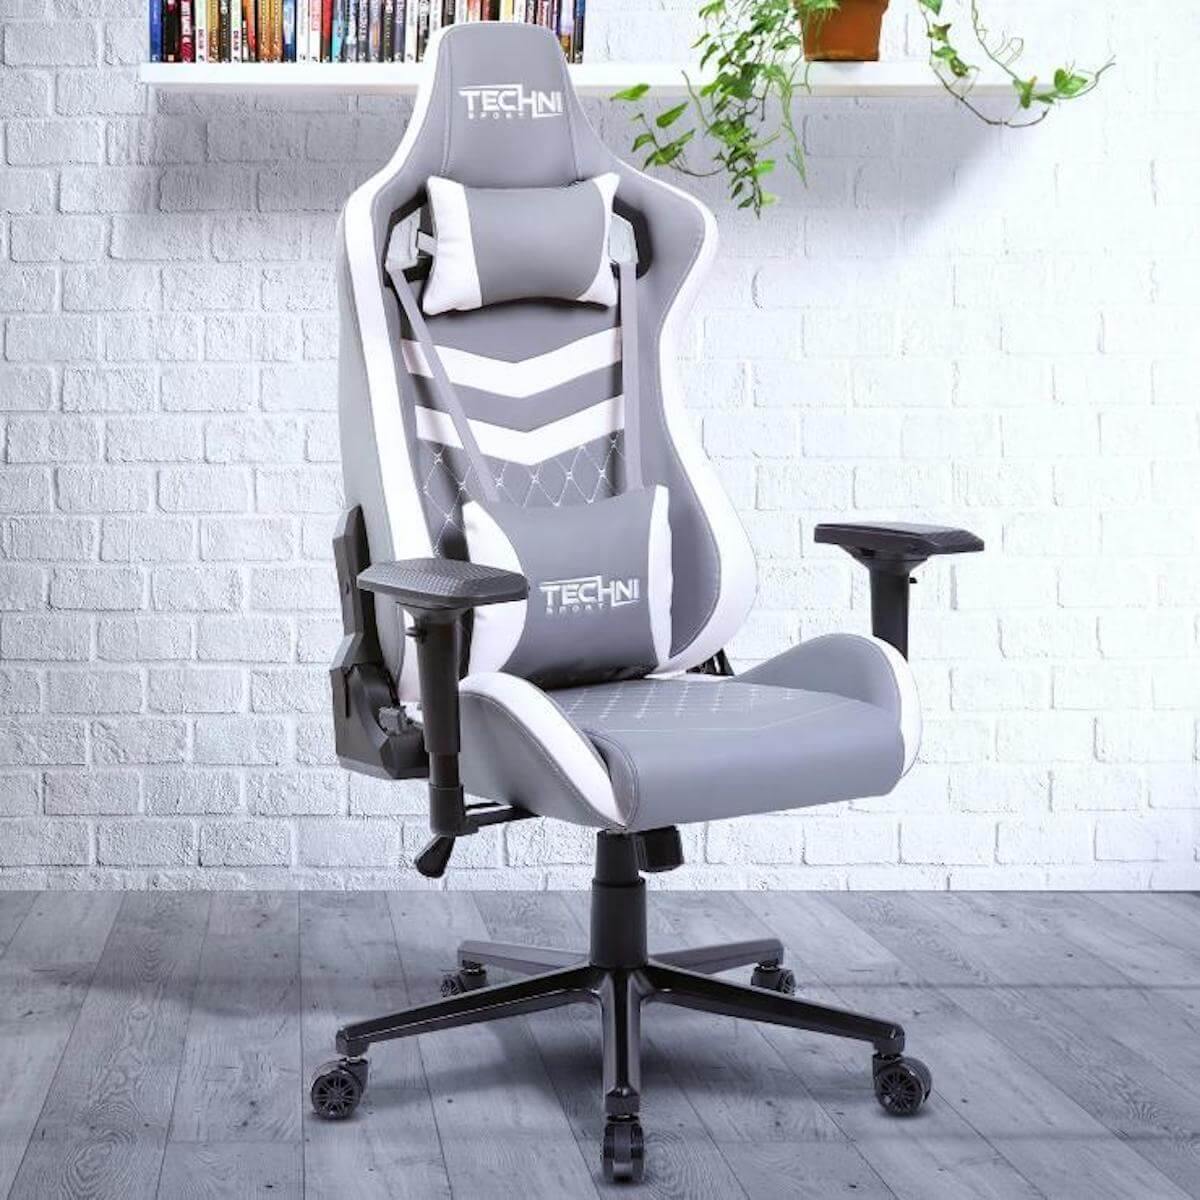 Techni Sport TS-83 White Ergonomic High Black Racer Style PC Gaming Chair RTA-TS83-GRY-WHT in Office #color_white